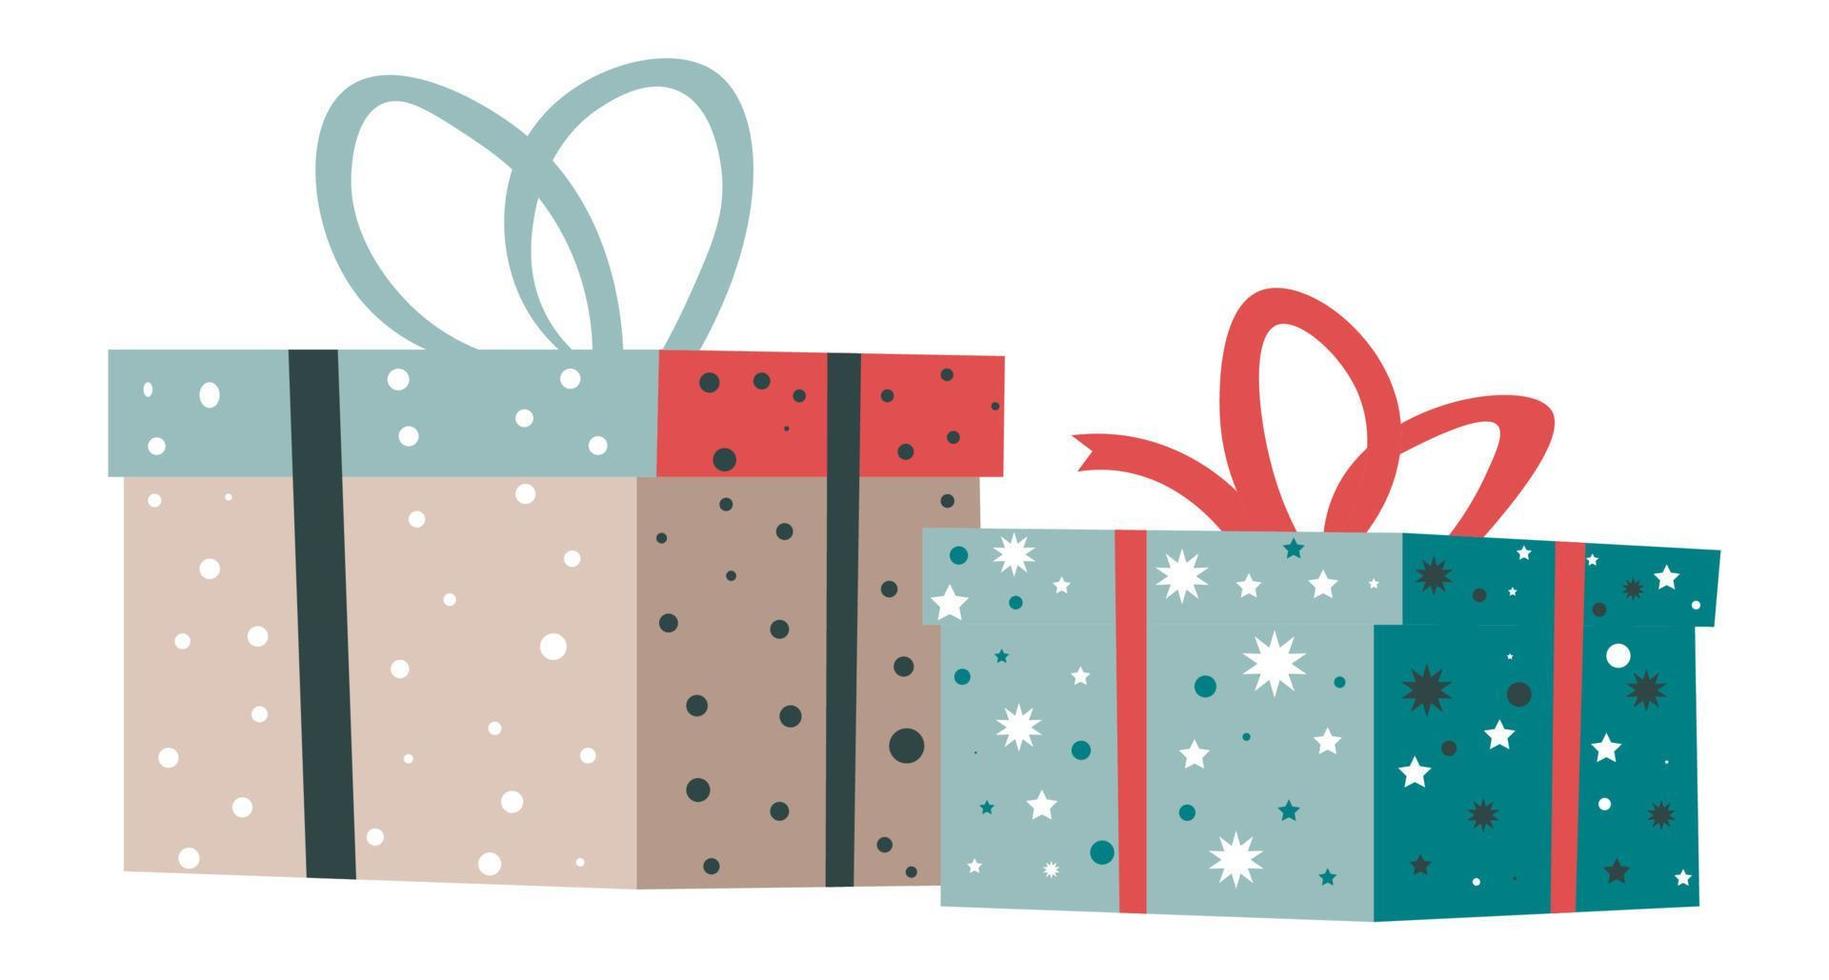 Presents and gifts in boxes for xmas and new year vector